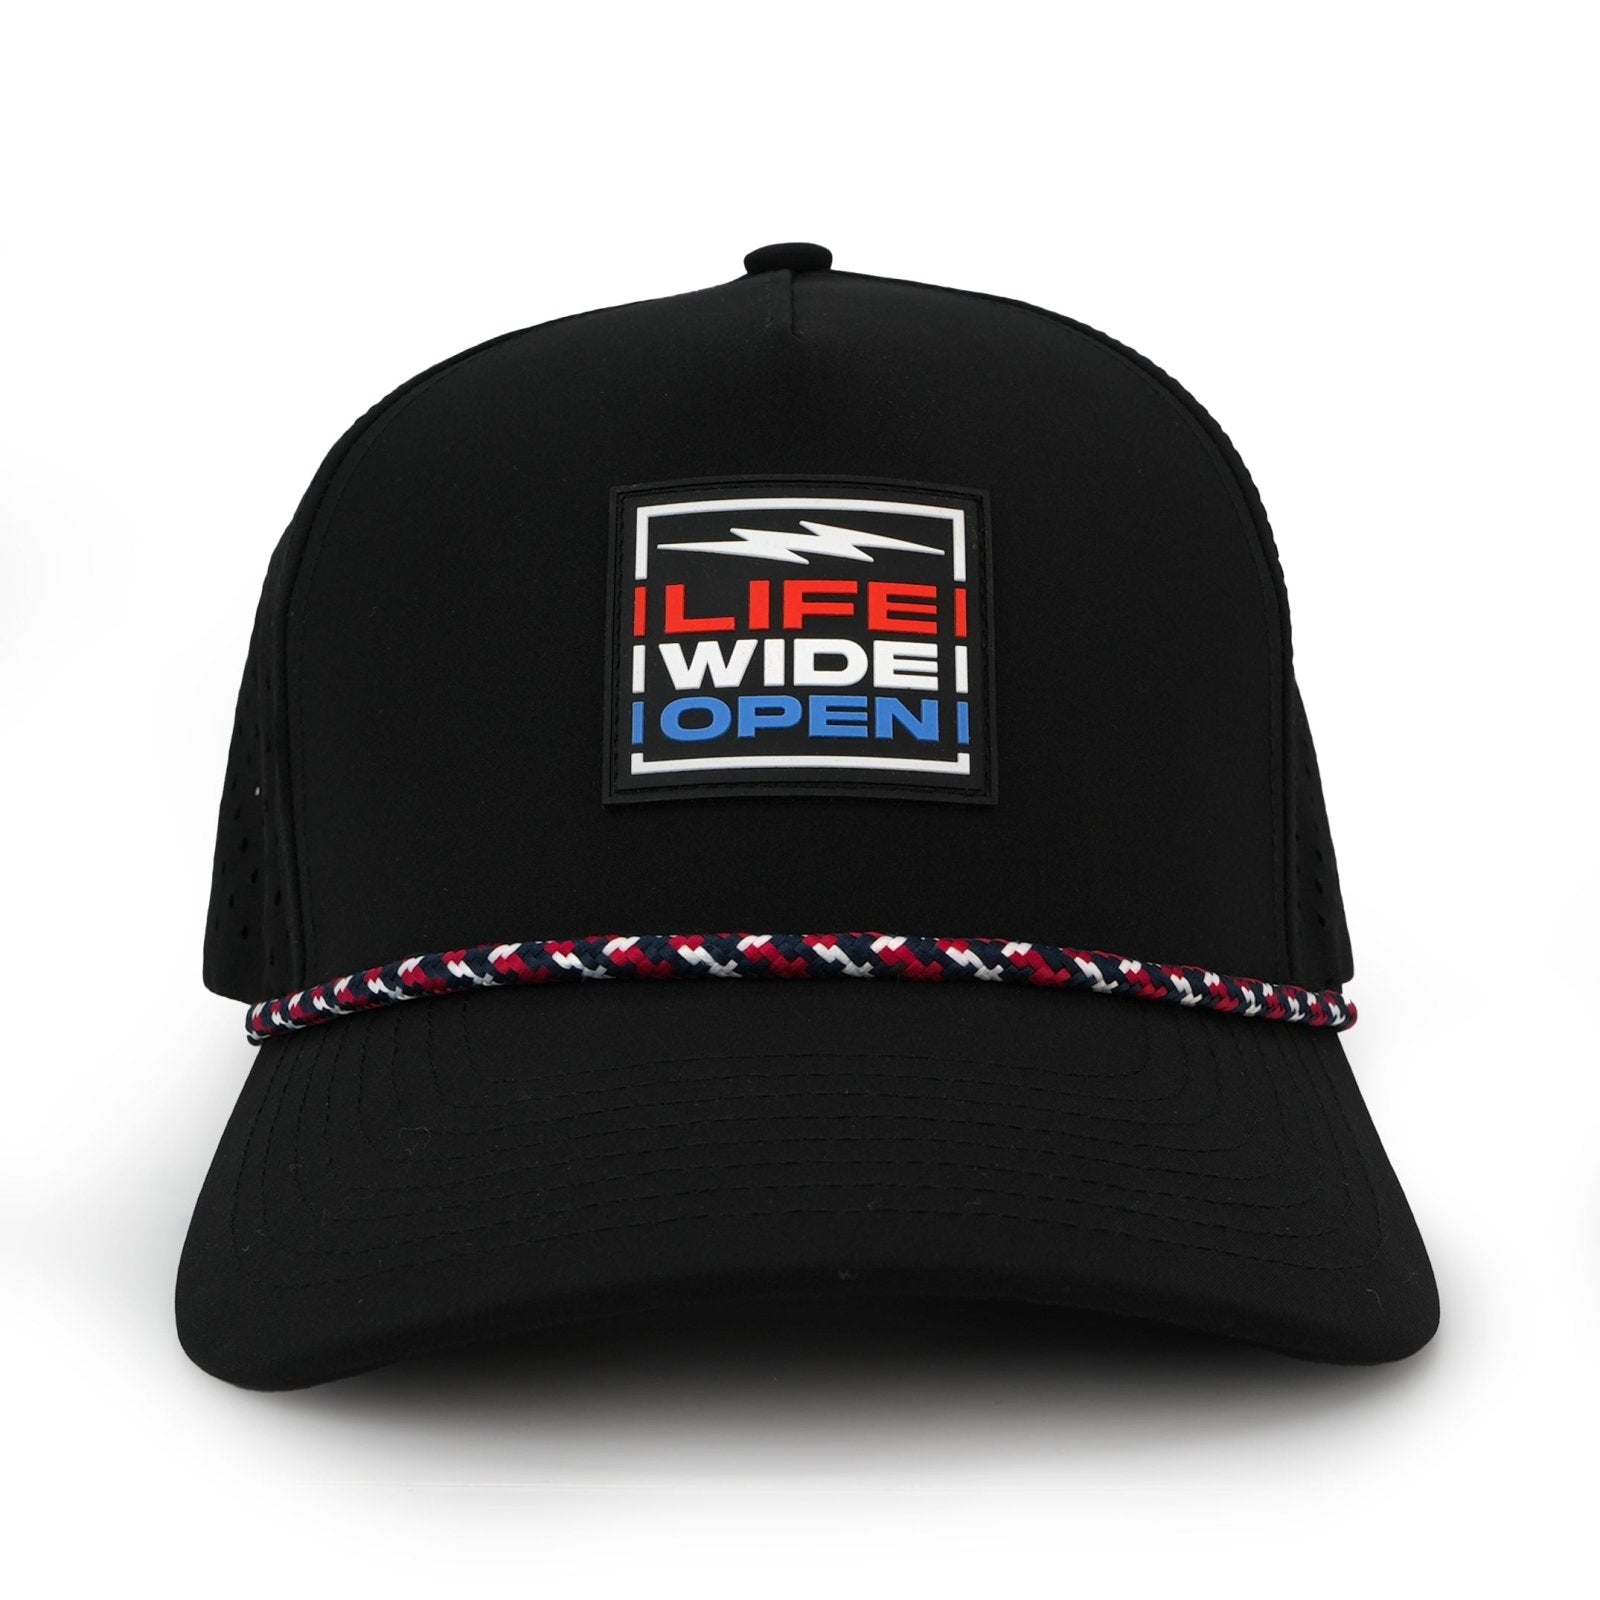 Life Wide Open Black Performance Hat